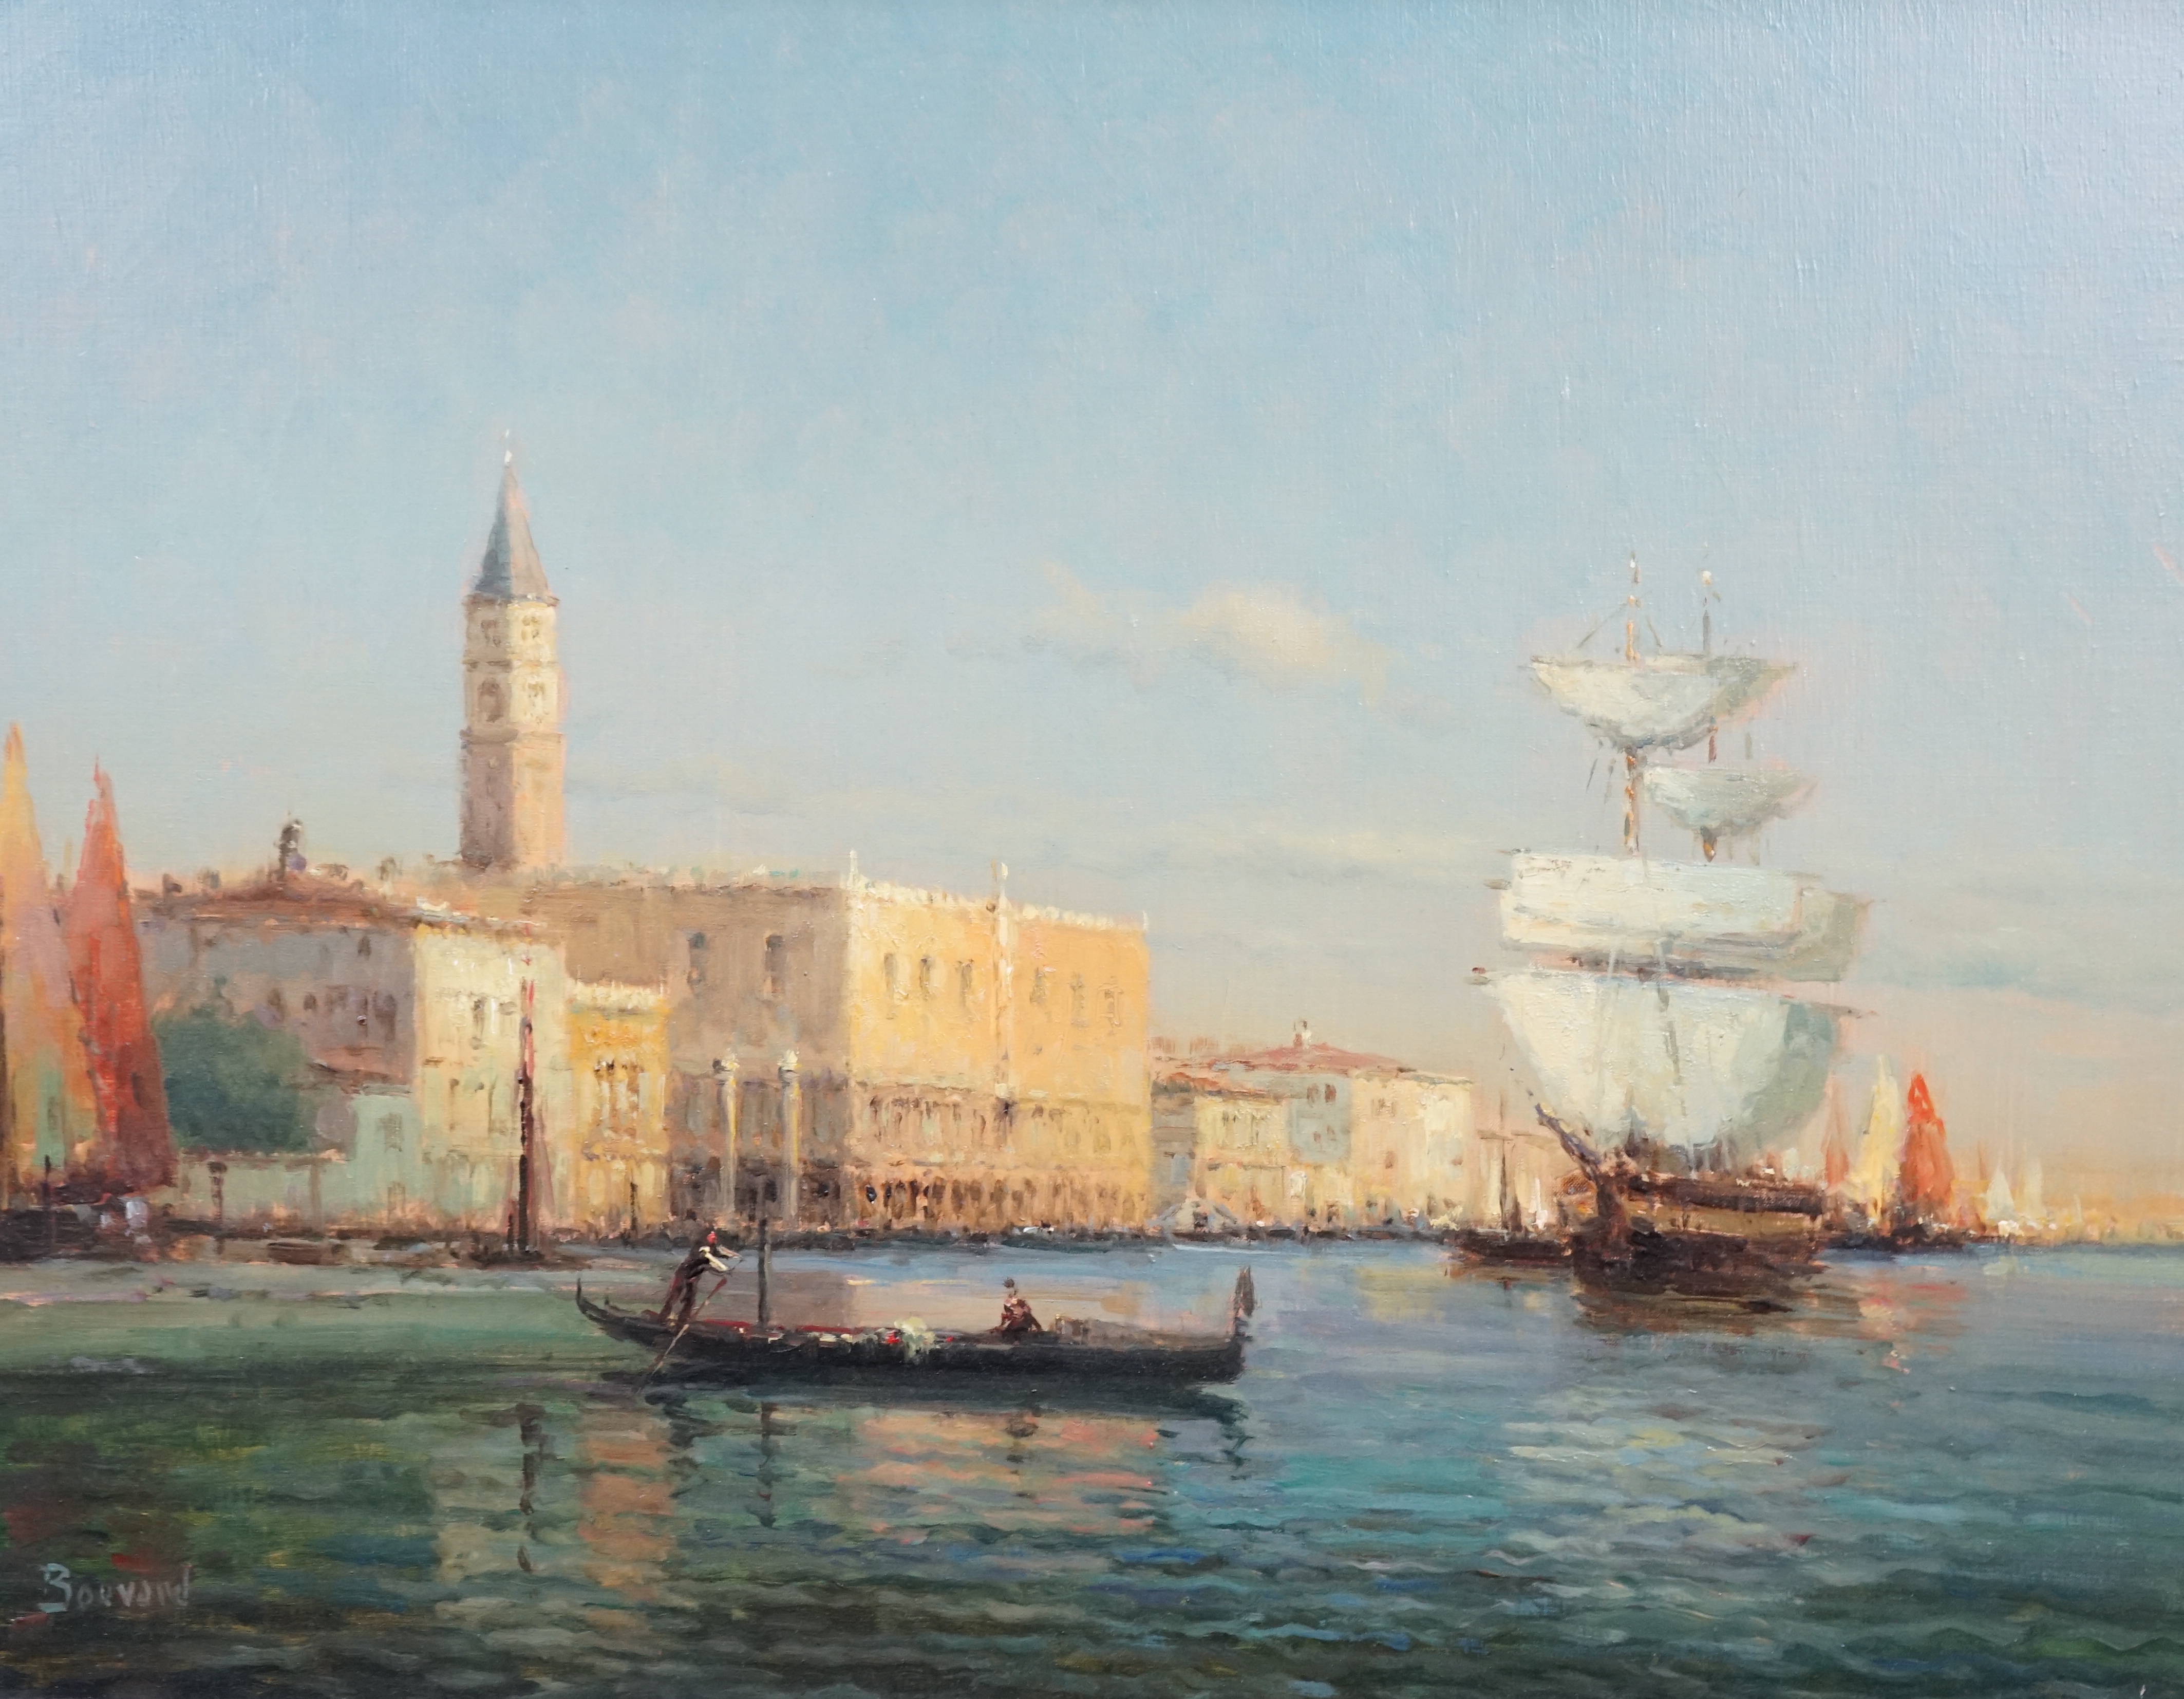 Noel Georges Bouvard (French, 1912-1975), Gondola and sailing ship off the Doges Palace, Venice, oil on canvas, 49 x 64cm                                                                                                   